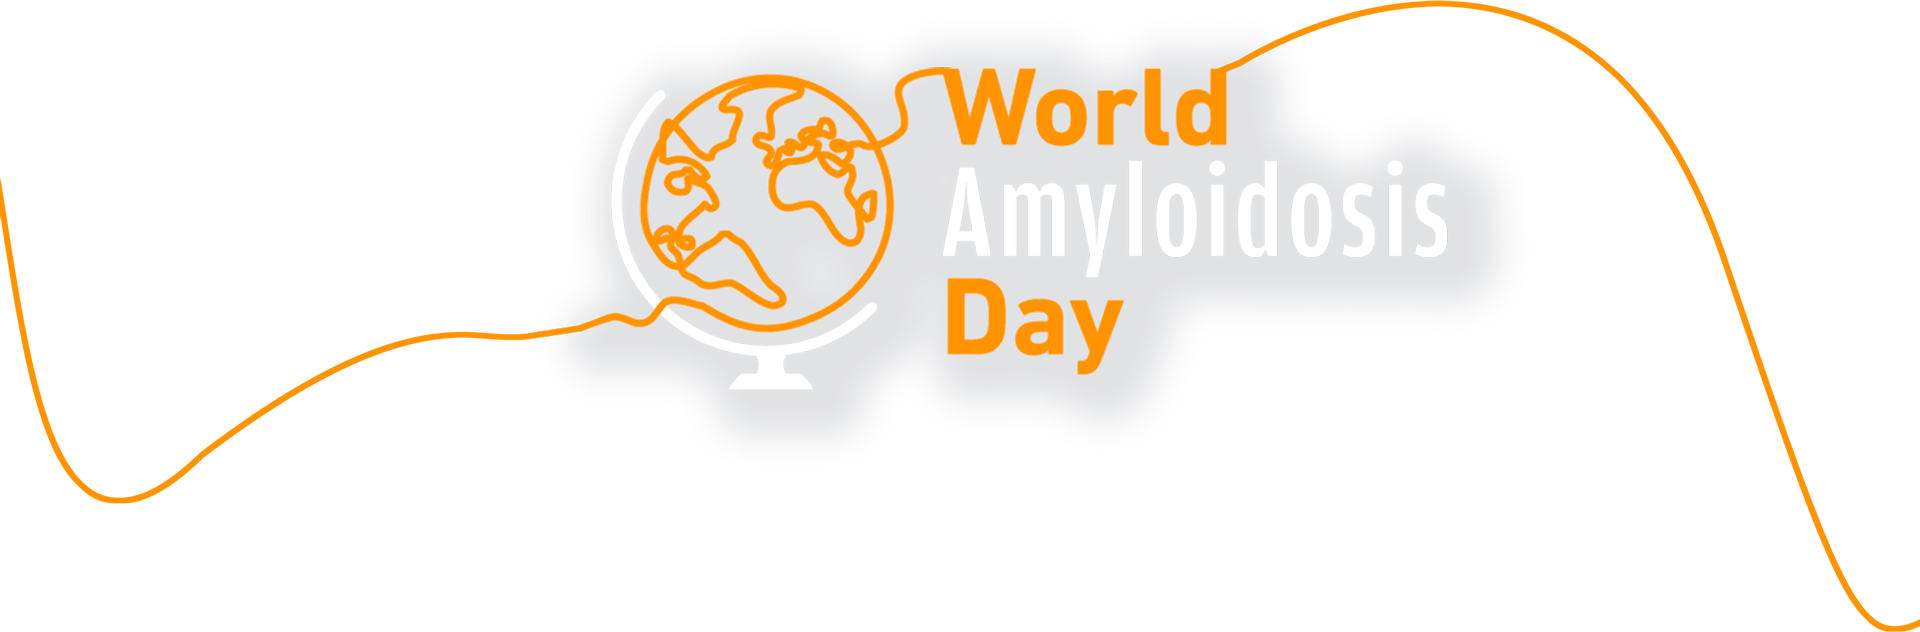 Second World Amyloidosis Day 